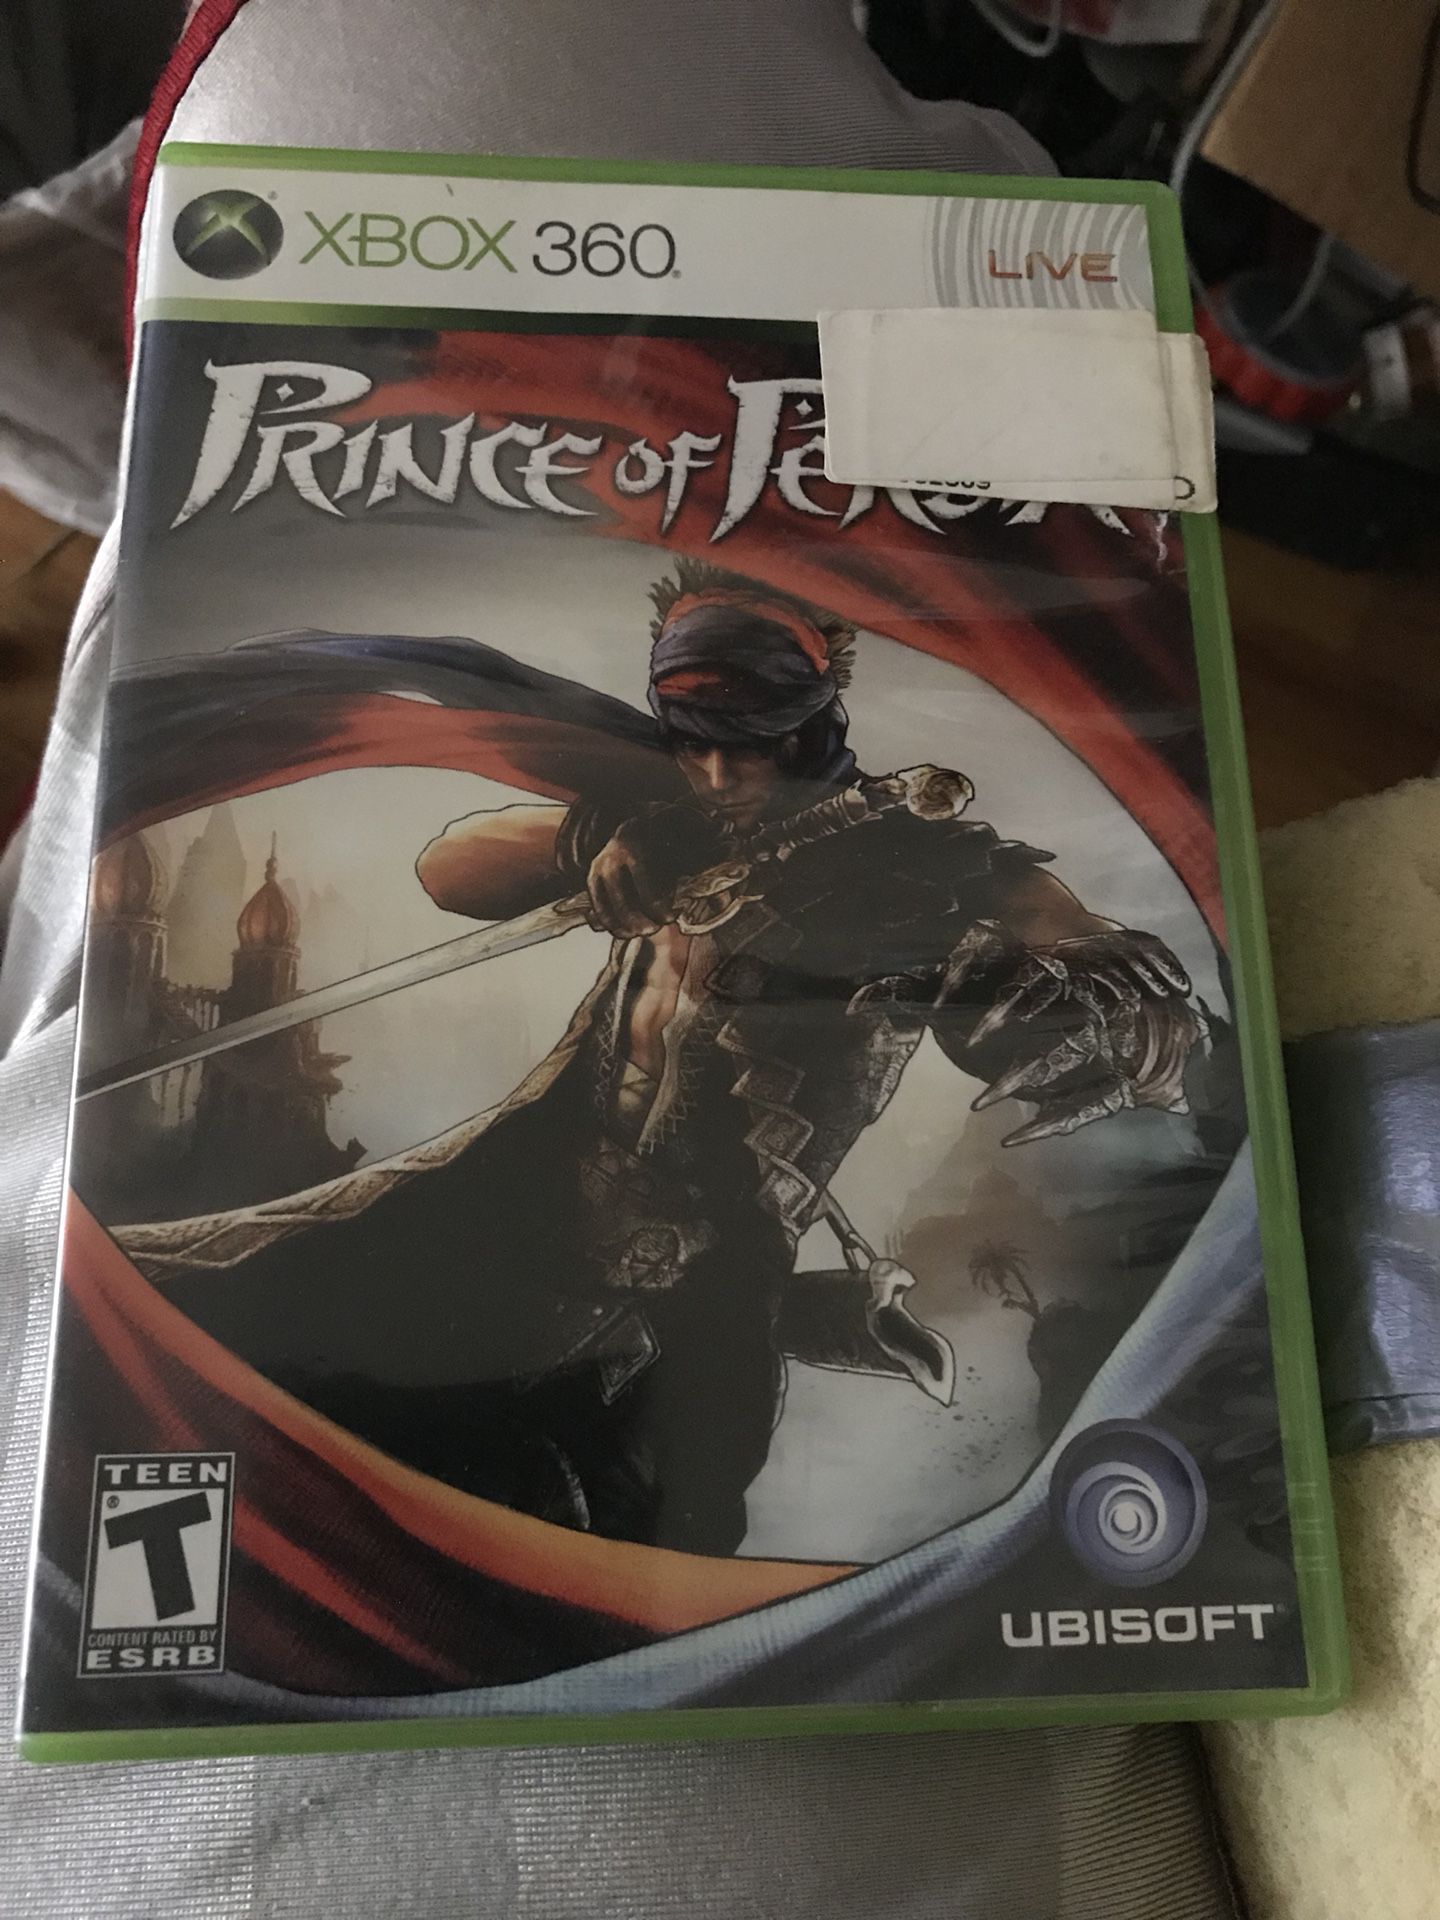 Prince of Persia Xbox 360 game